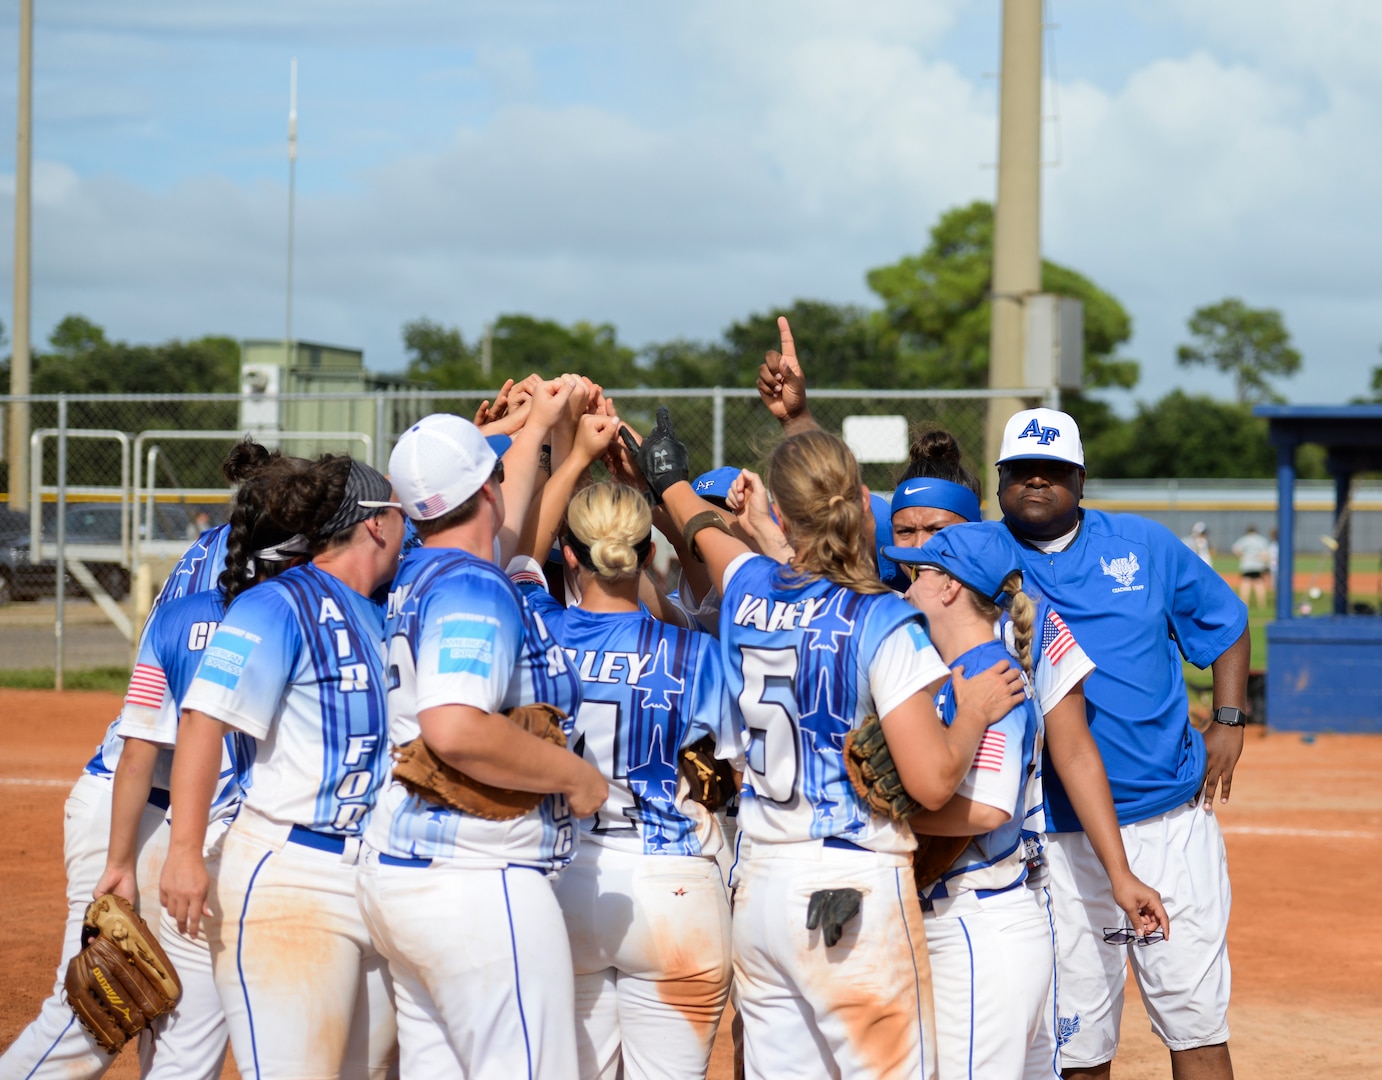 PENSACOLA, Fla.-- The All Air Force team huddles for a team-high five after winning gold for the second year running during the 2018 Women's Armed Forces Softball Championship, Aug. 15-17. Teams from the Navy, Army and Marine Corps look to dethrone the defending champion Air Force team. (U.S. Navy photo by Mass Communication Specialist 2nd Class Timothy A. Hazel/Released)